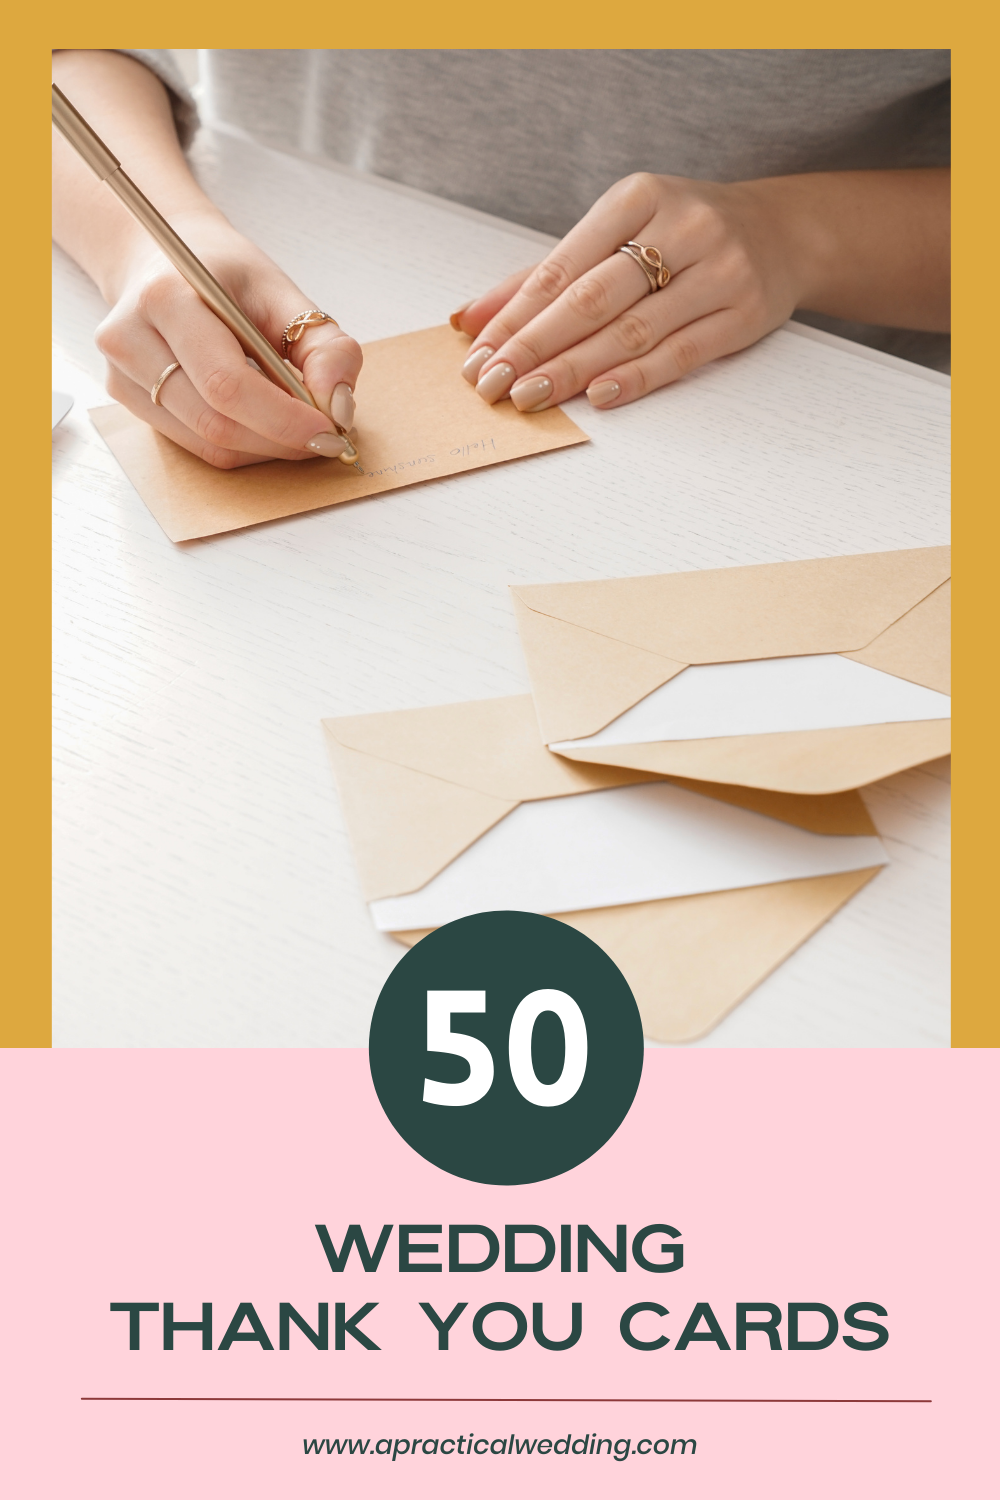 Wedding Thank You Cards You'll Want To Send | A Practical Wedding